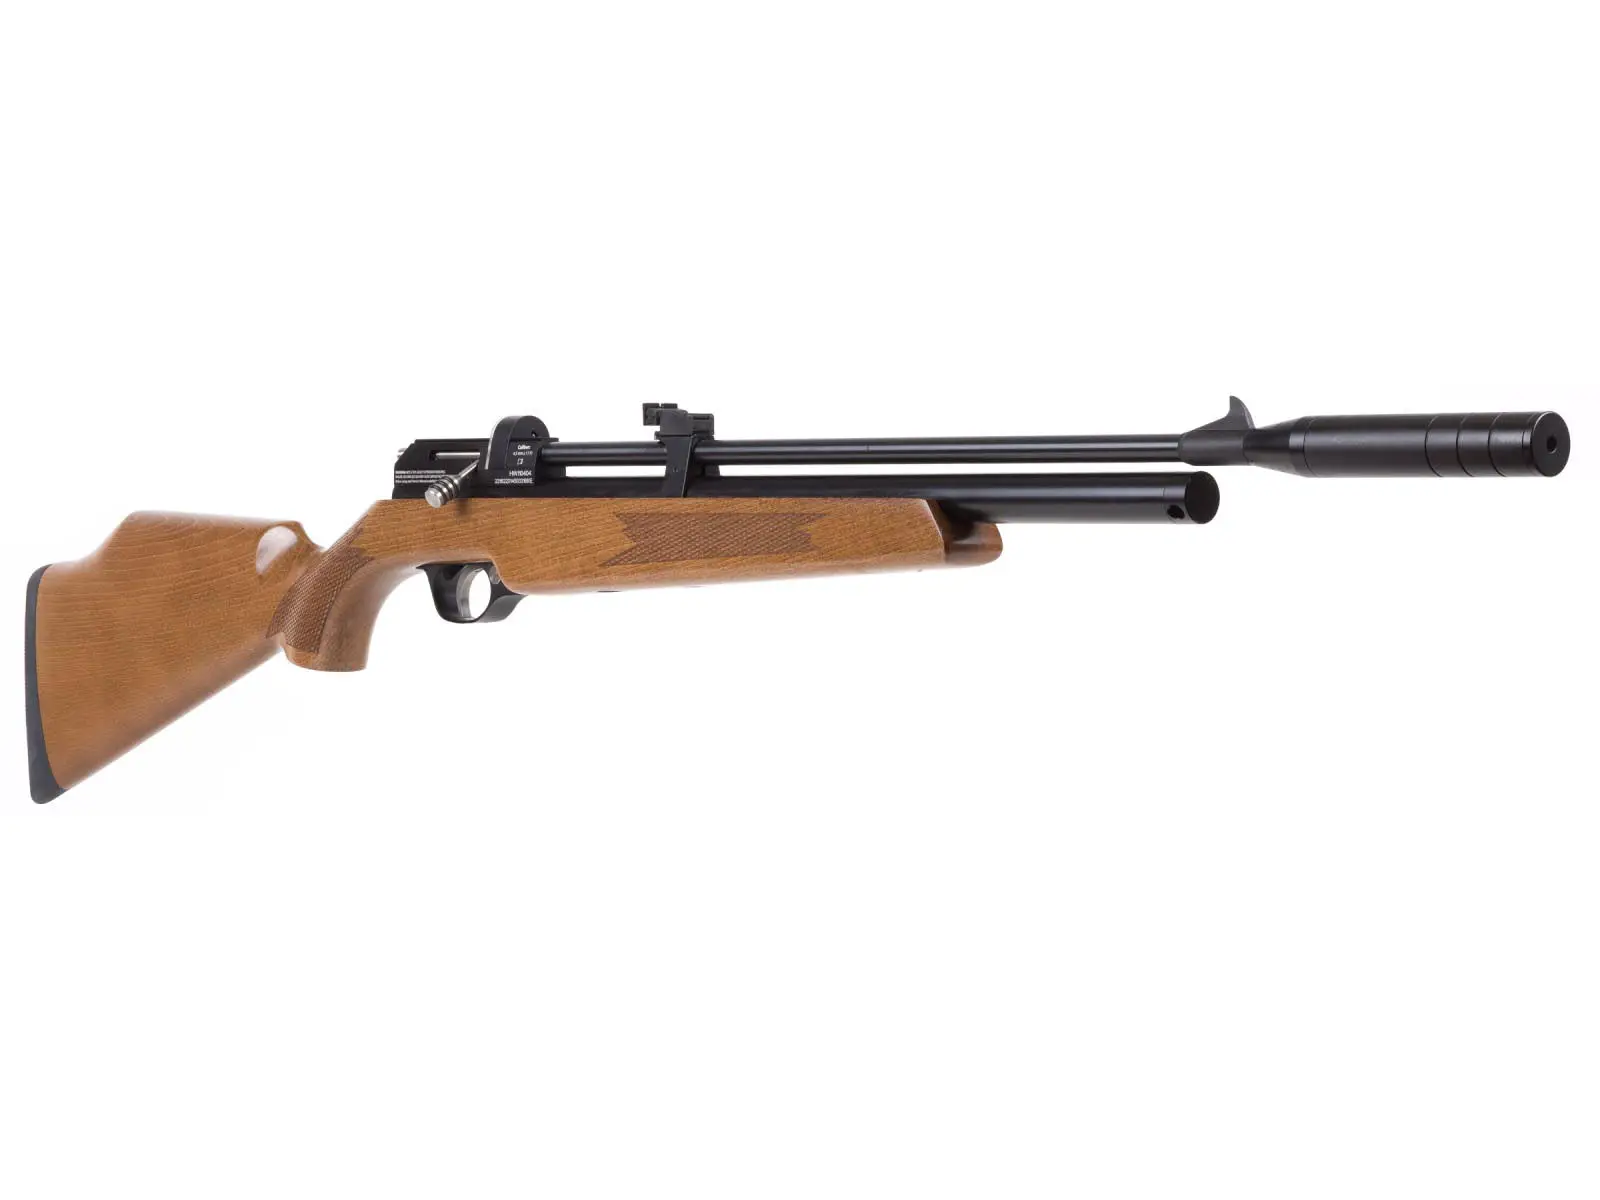 storm2 Best PCP air rifles - 11 of the best PCP guns you can buy right now (Reviews and Buying Guide 2023)